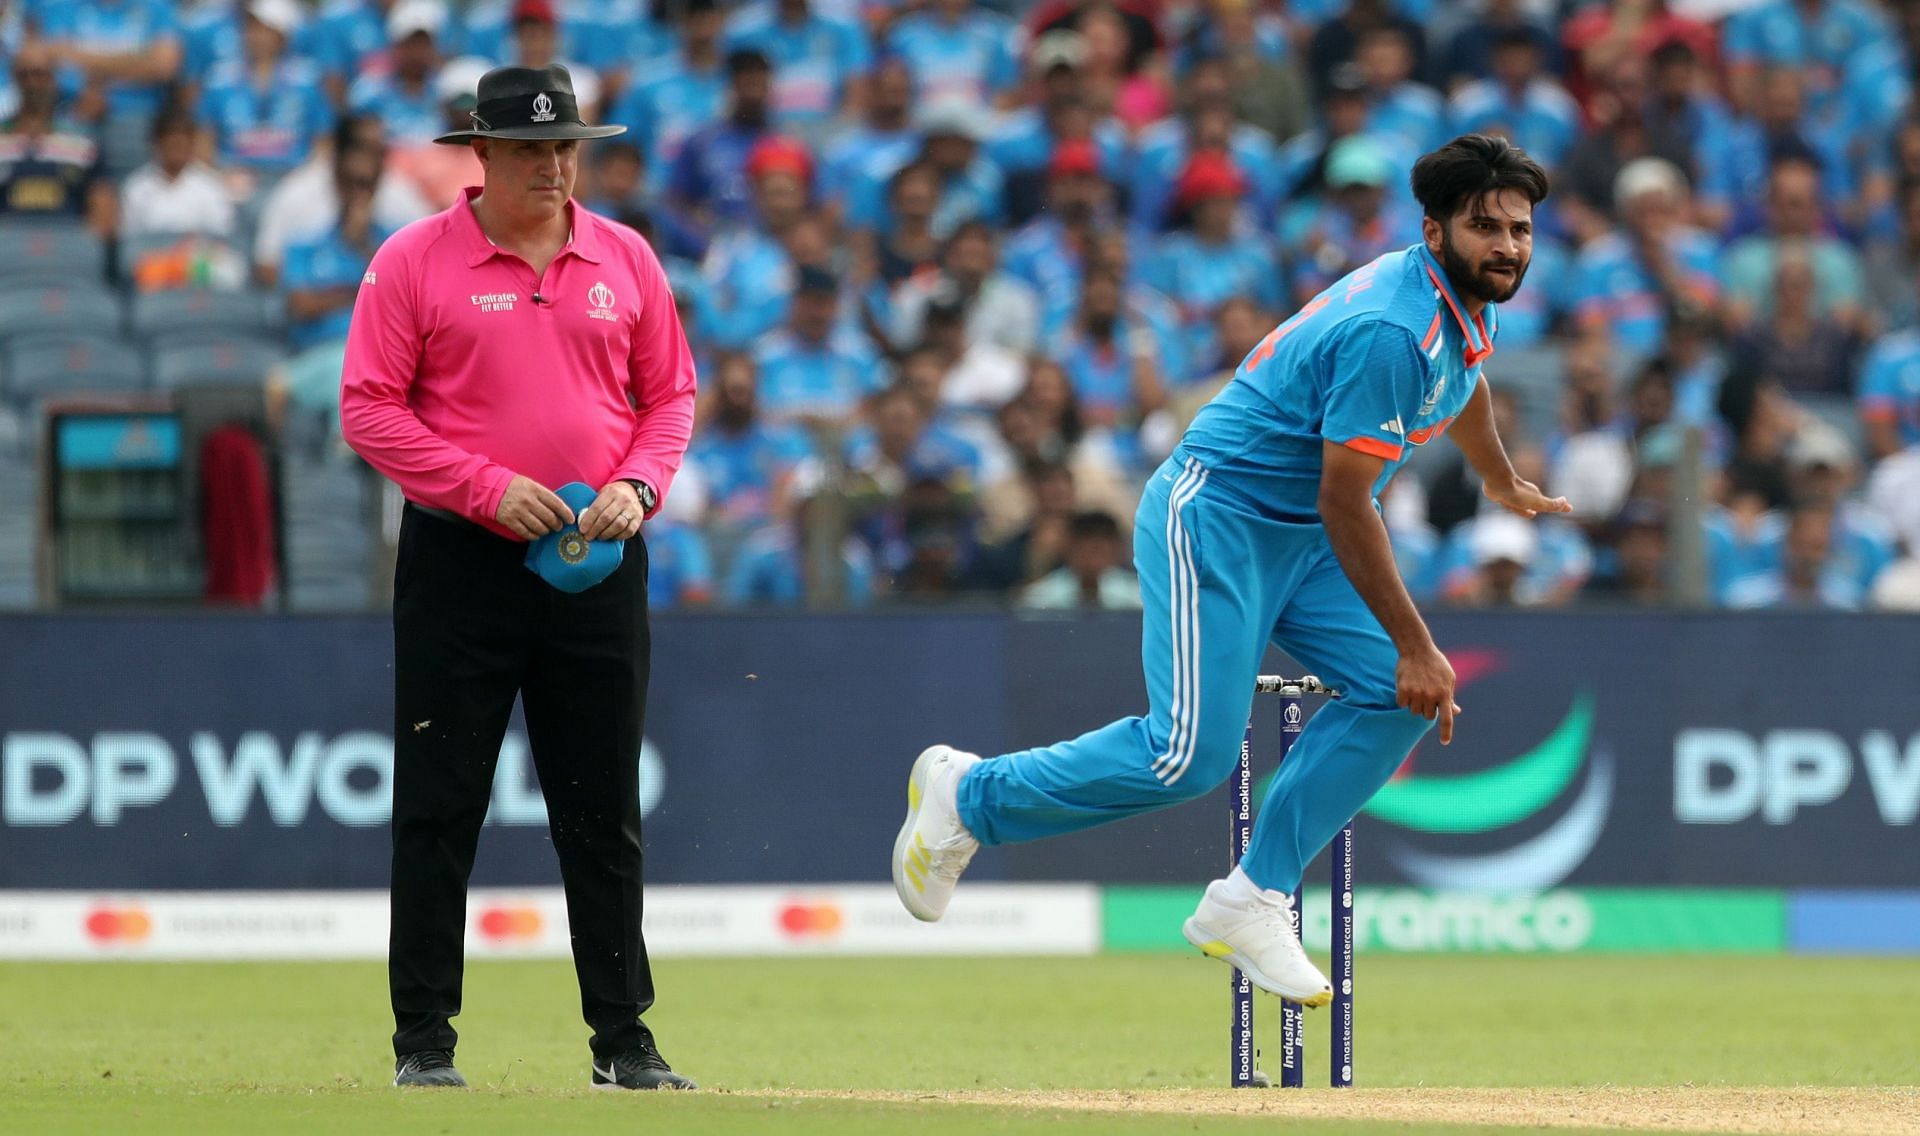 Shardul Thakur during India v Bangladesh - ICC Cricket World Cup 2023 Match [Getty Images]